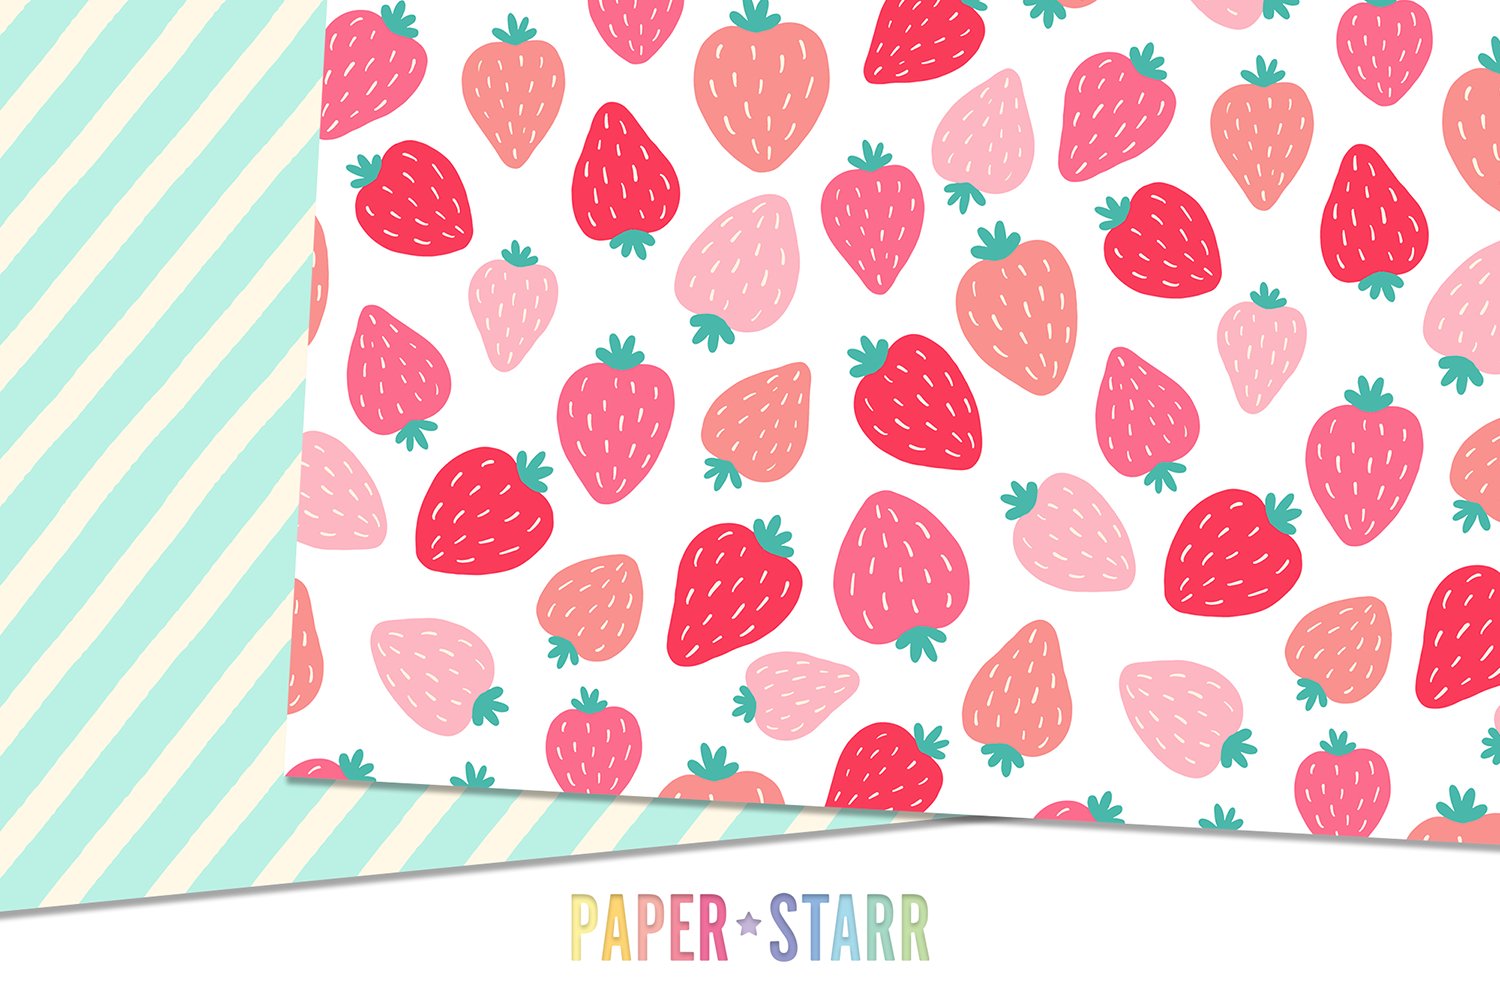 Light pattern with pink strawberries.